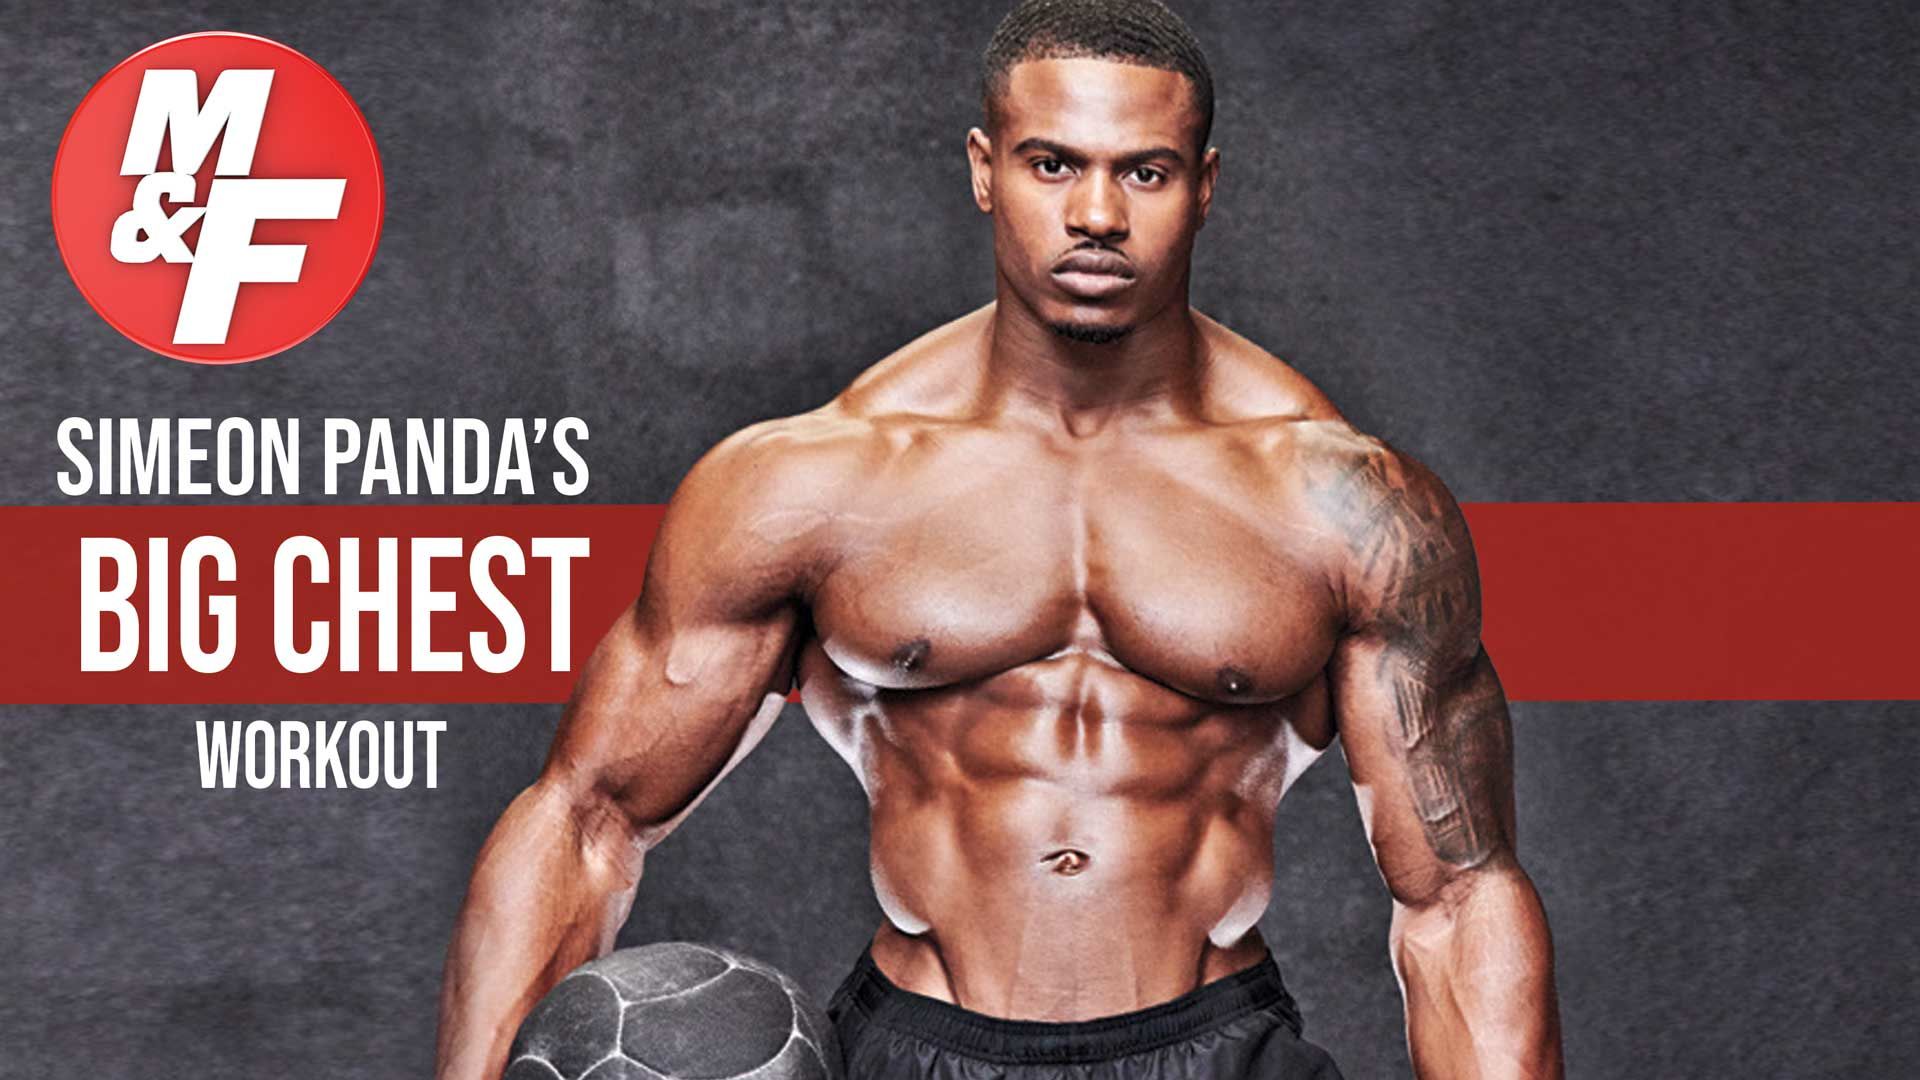 Simeon Panda's Big Chest Workout Explained. Muscle & Fitness